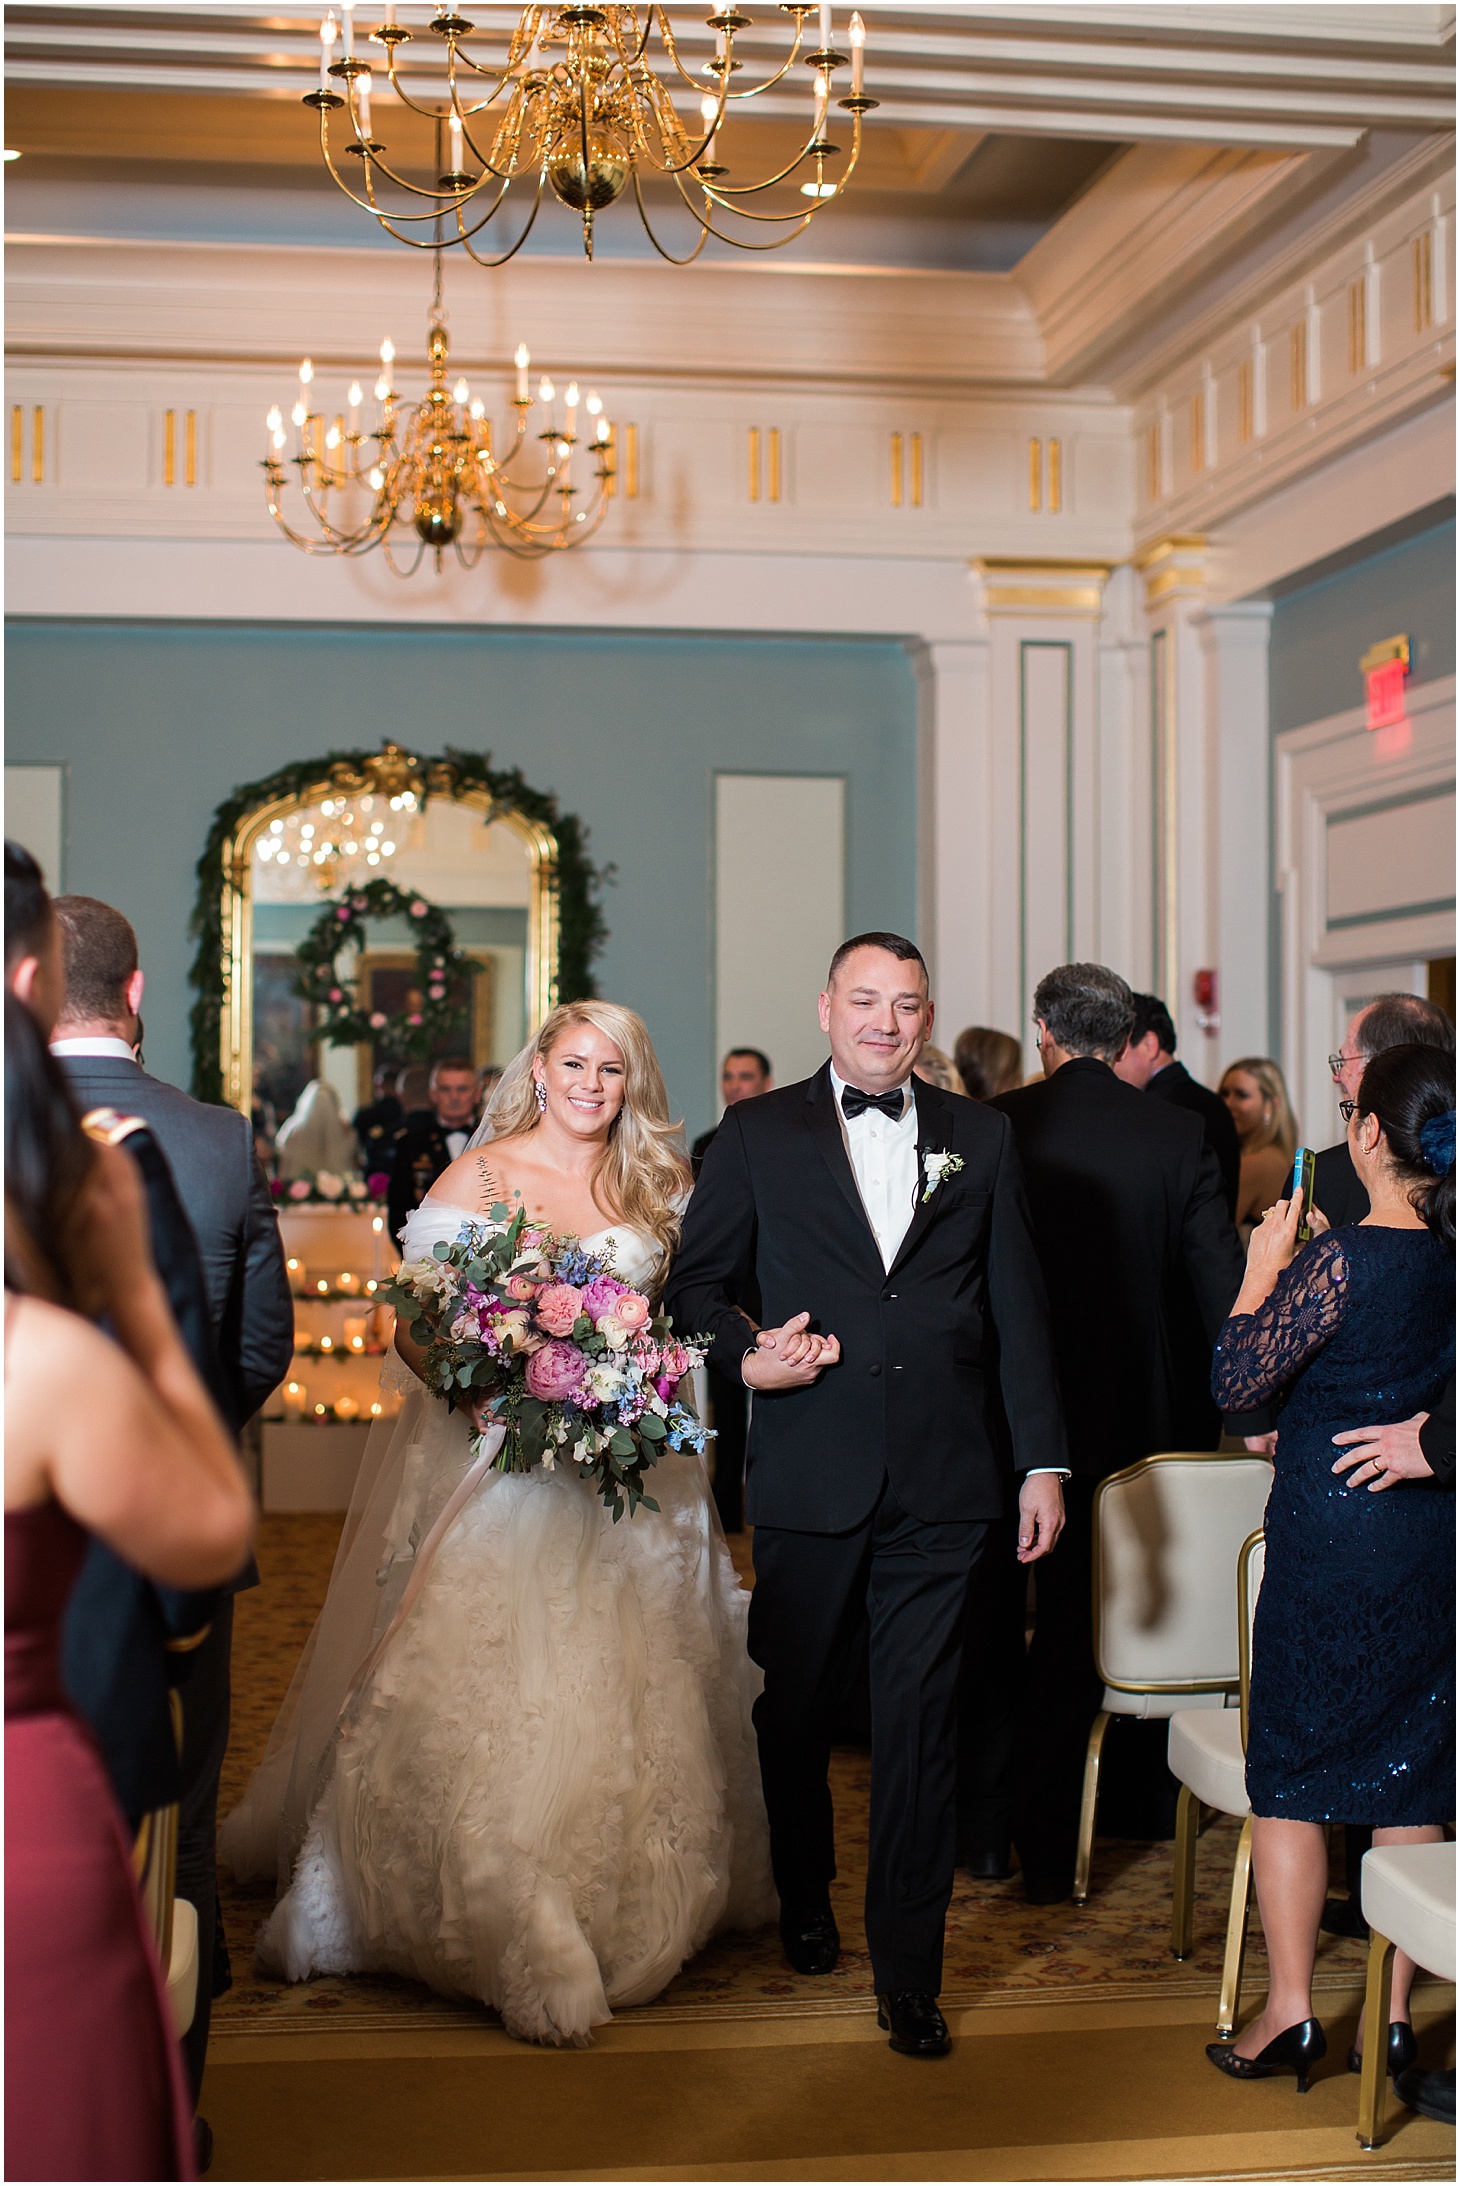 Wedding Ceremony at the Army and Navy Club | Luxe Winter Wedding in Washington, DC | Sarah Bradshaw Photography | Washington DC Wedding Photographer